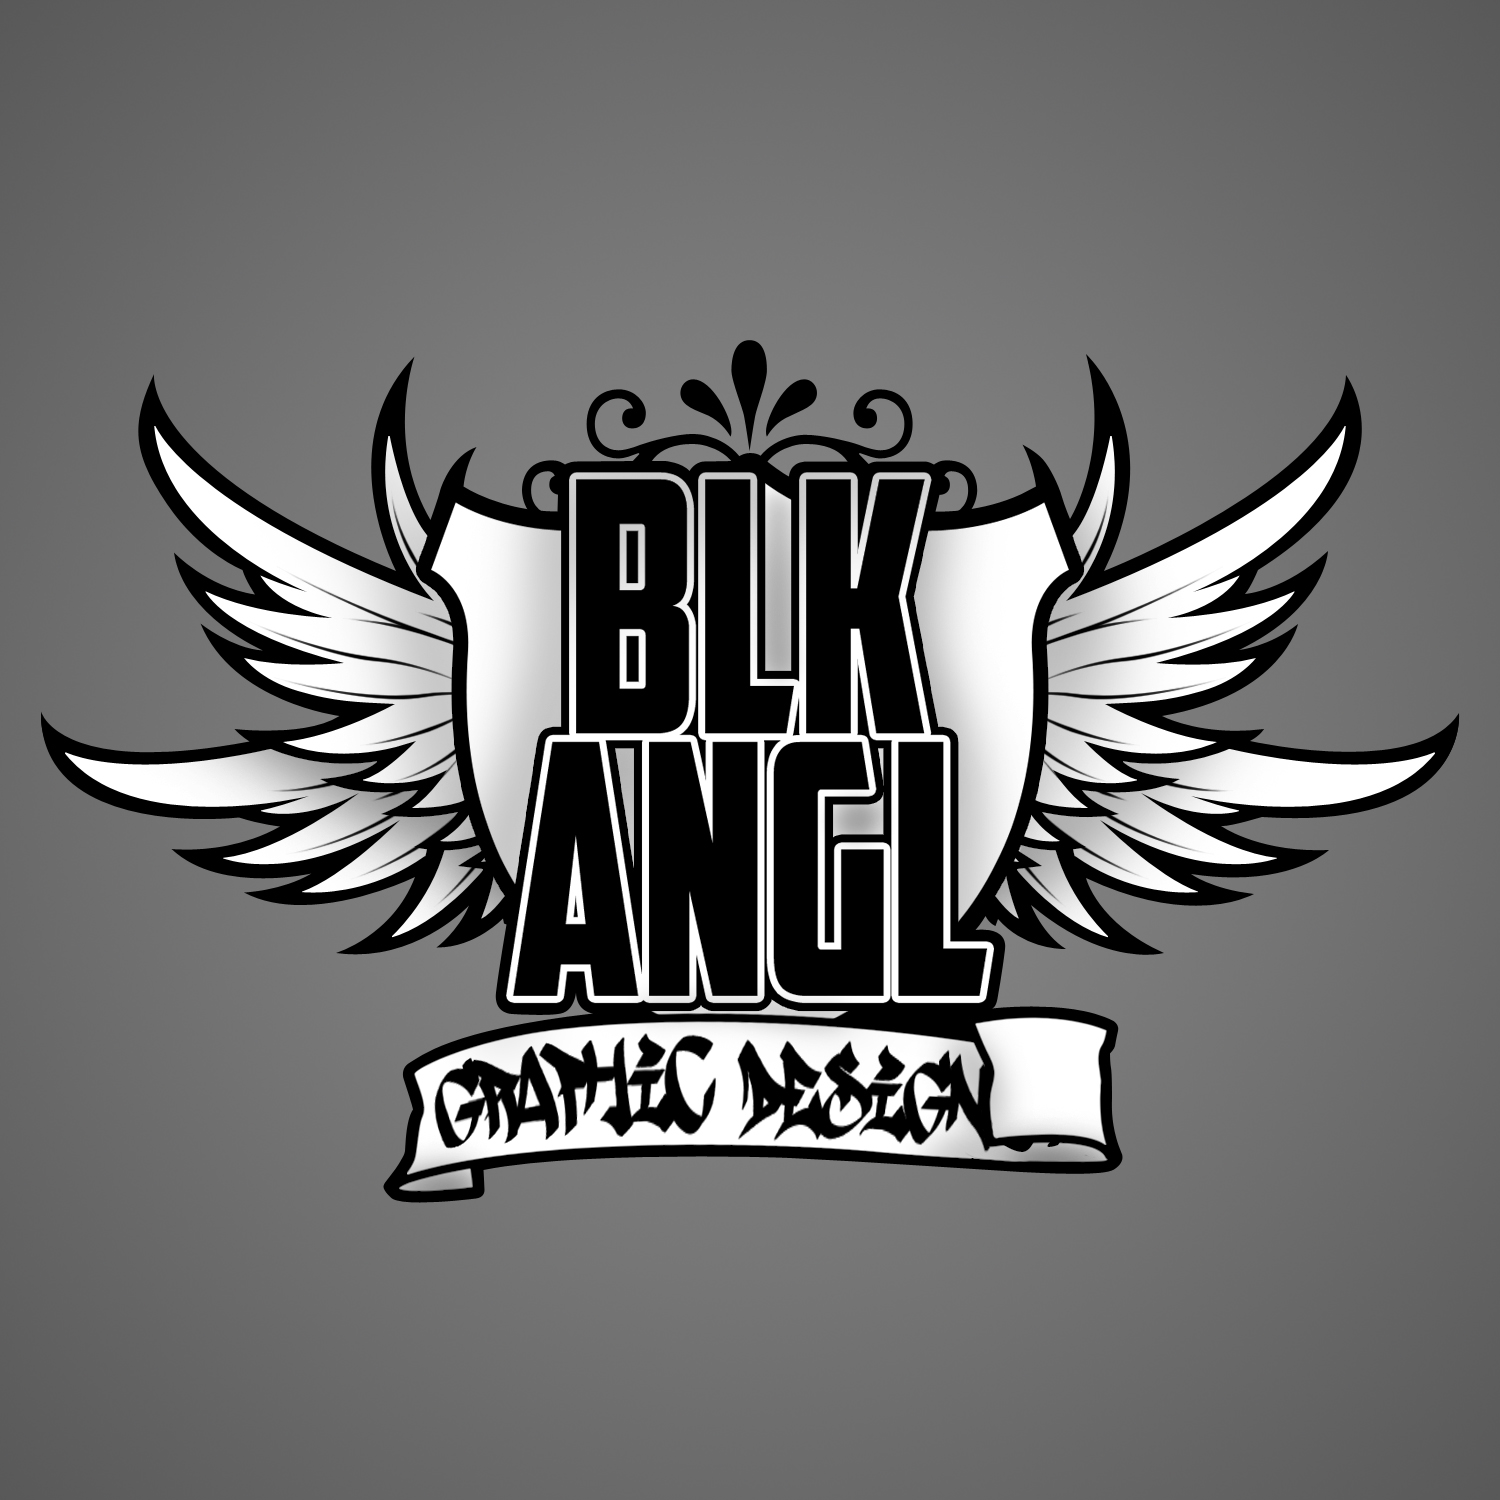 Clipart library: More Like Black Angel Logo by DashFx